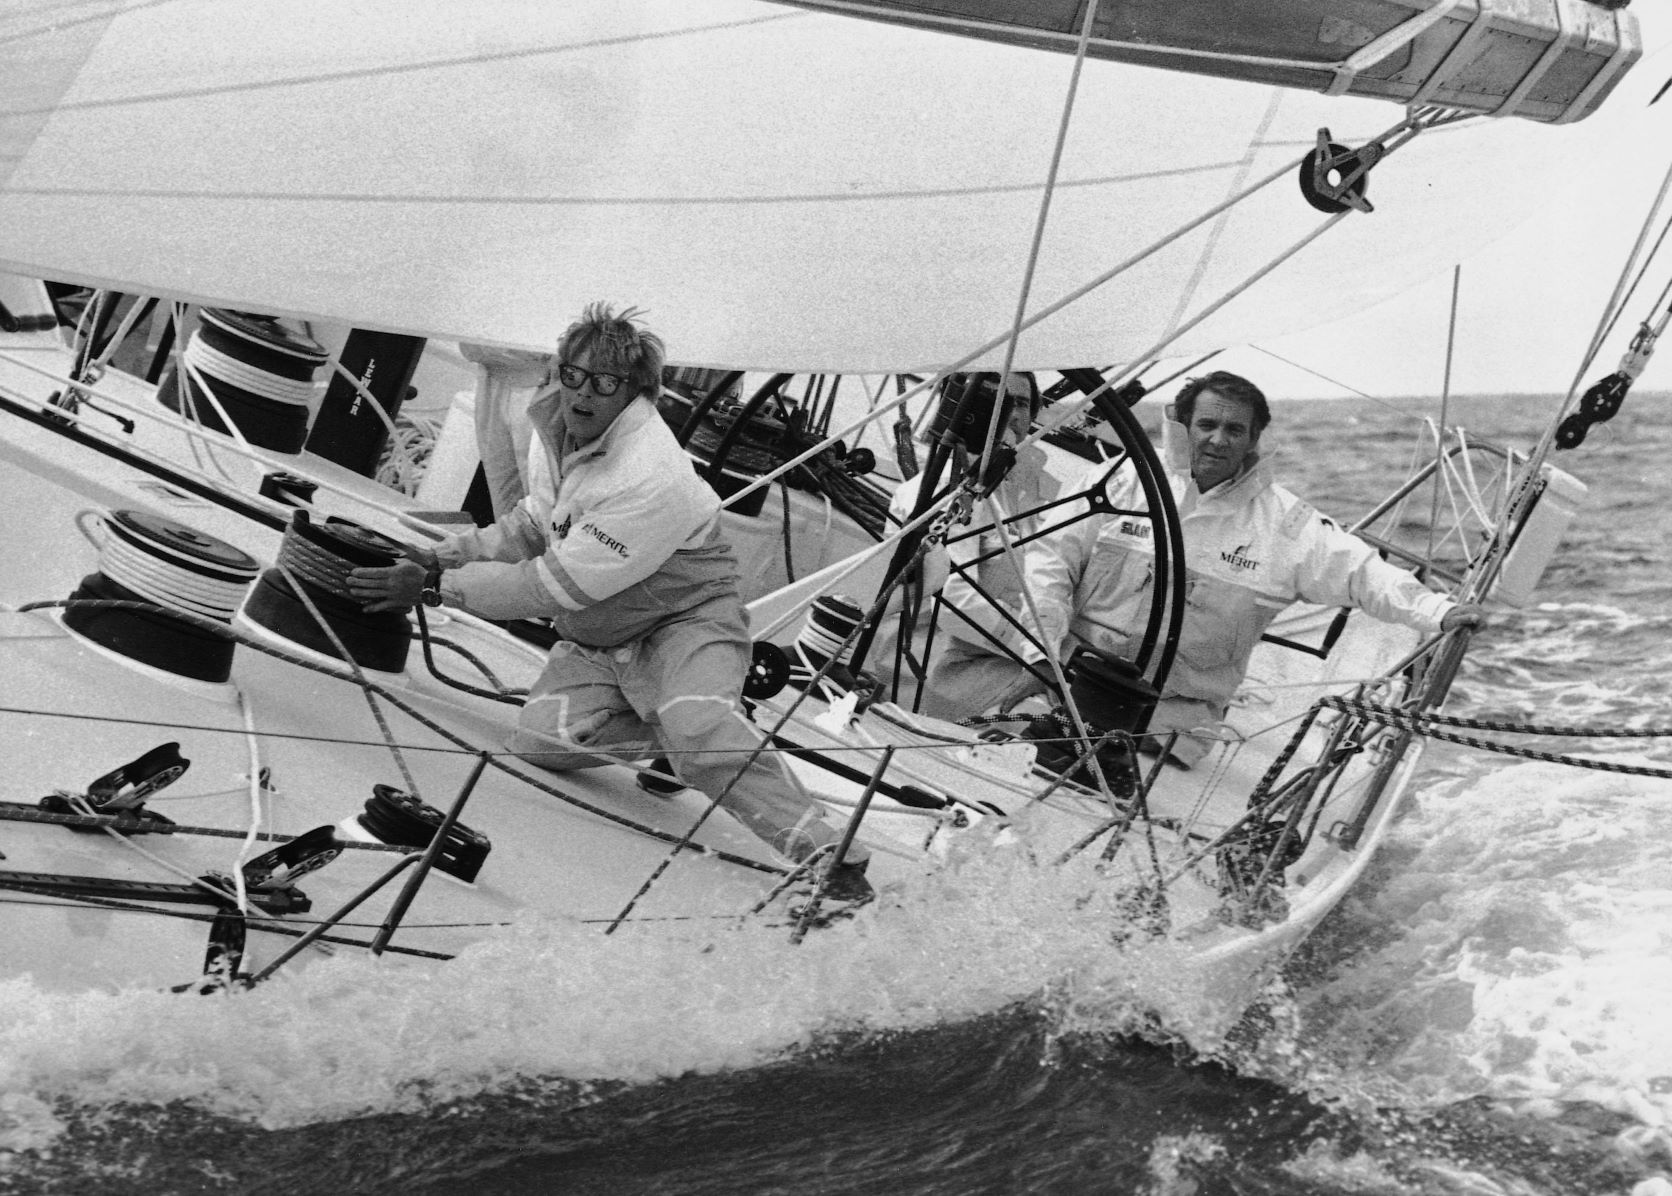 Pierre Fehlmann at the helm on Merit during the Fastnet race in 1983